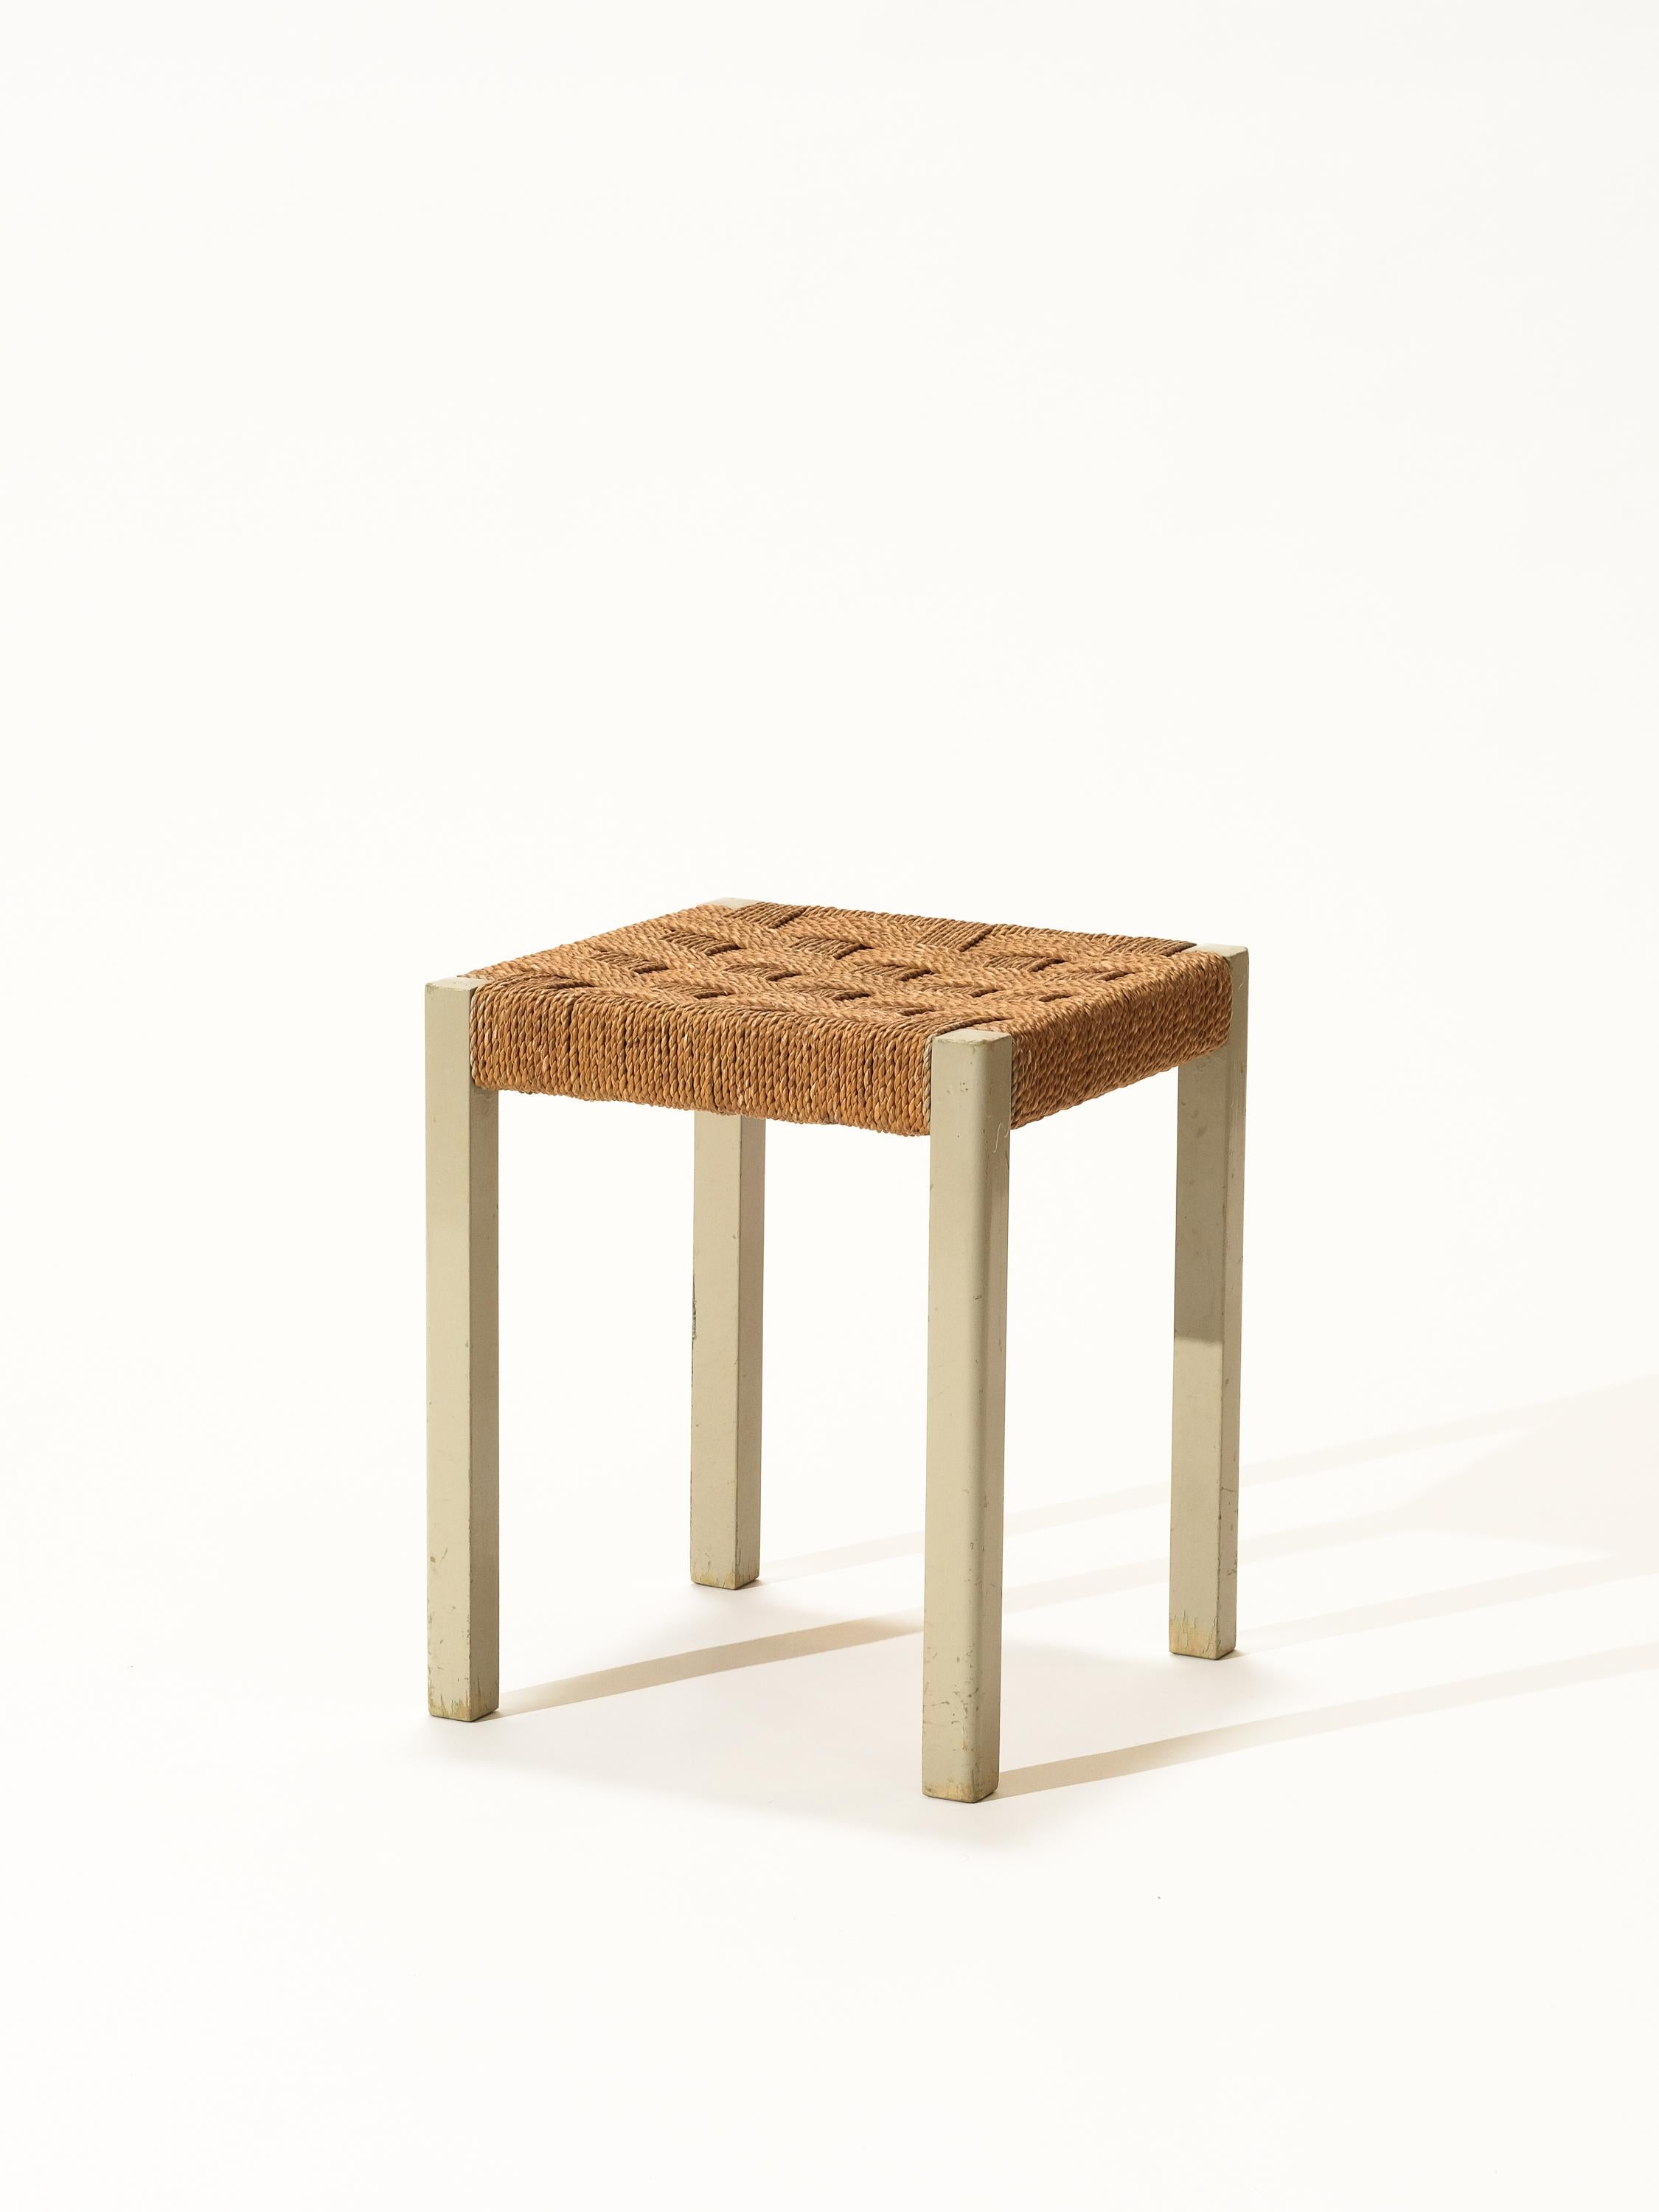 A stool by Axel Larsson. Made of painted wood with woven seagrass seat. All original.